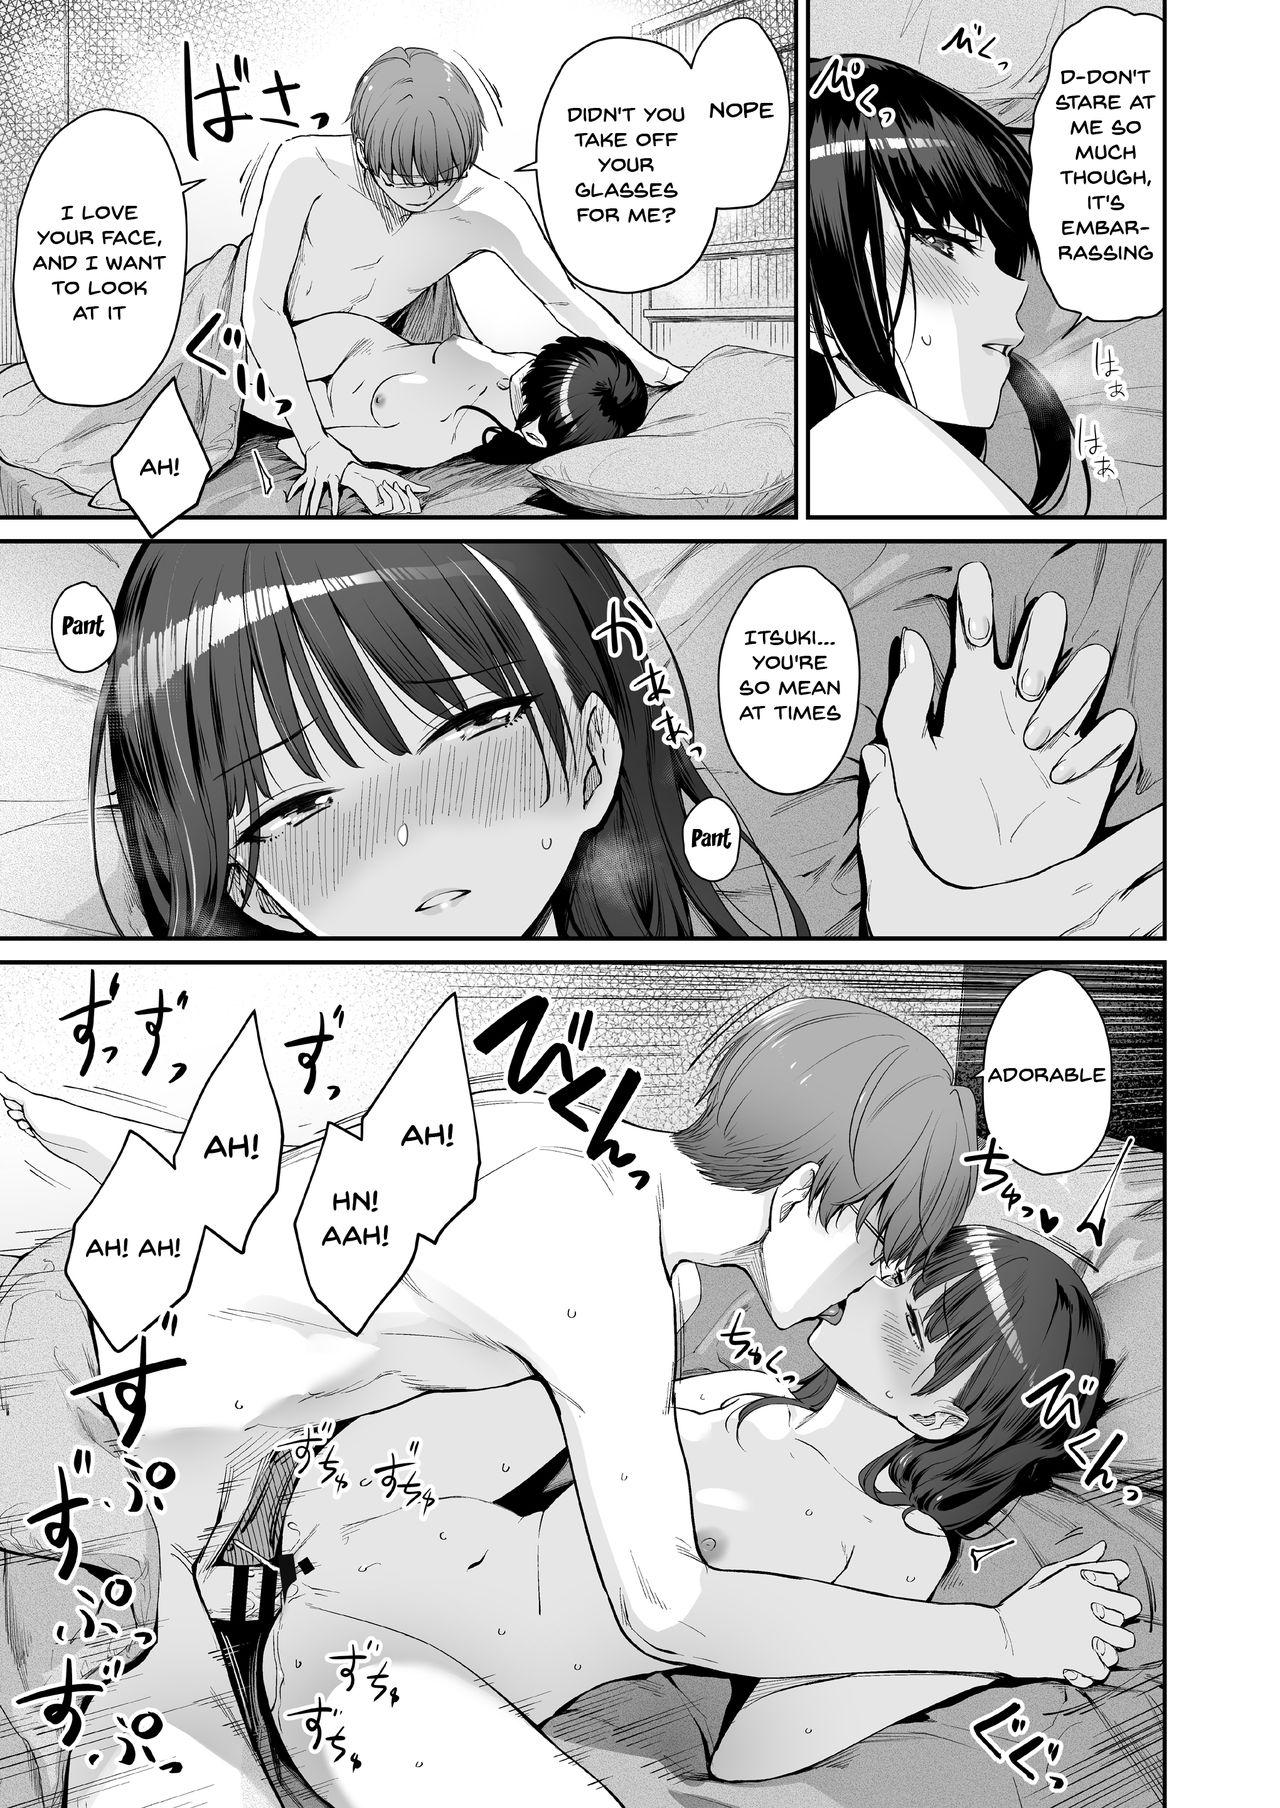 Hot Women Having Sex Zoku Boku dake ga Sex Dekinai Ie | I‘m The Only One That Can’t Get Laid in This House Part 2 - Original Punishment - Page 8